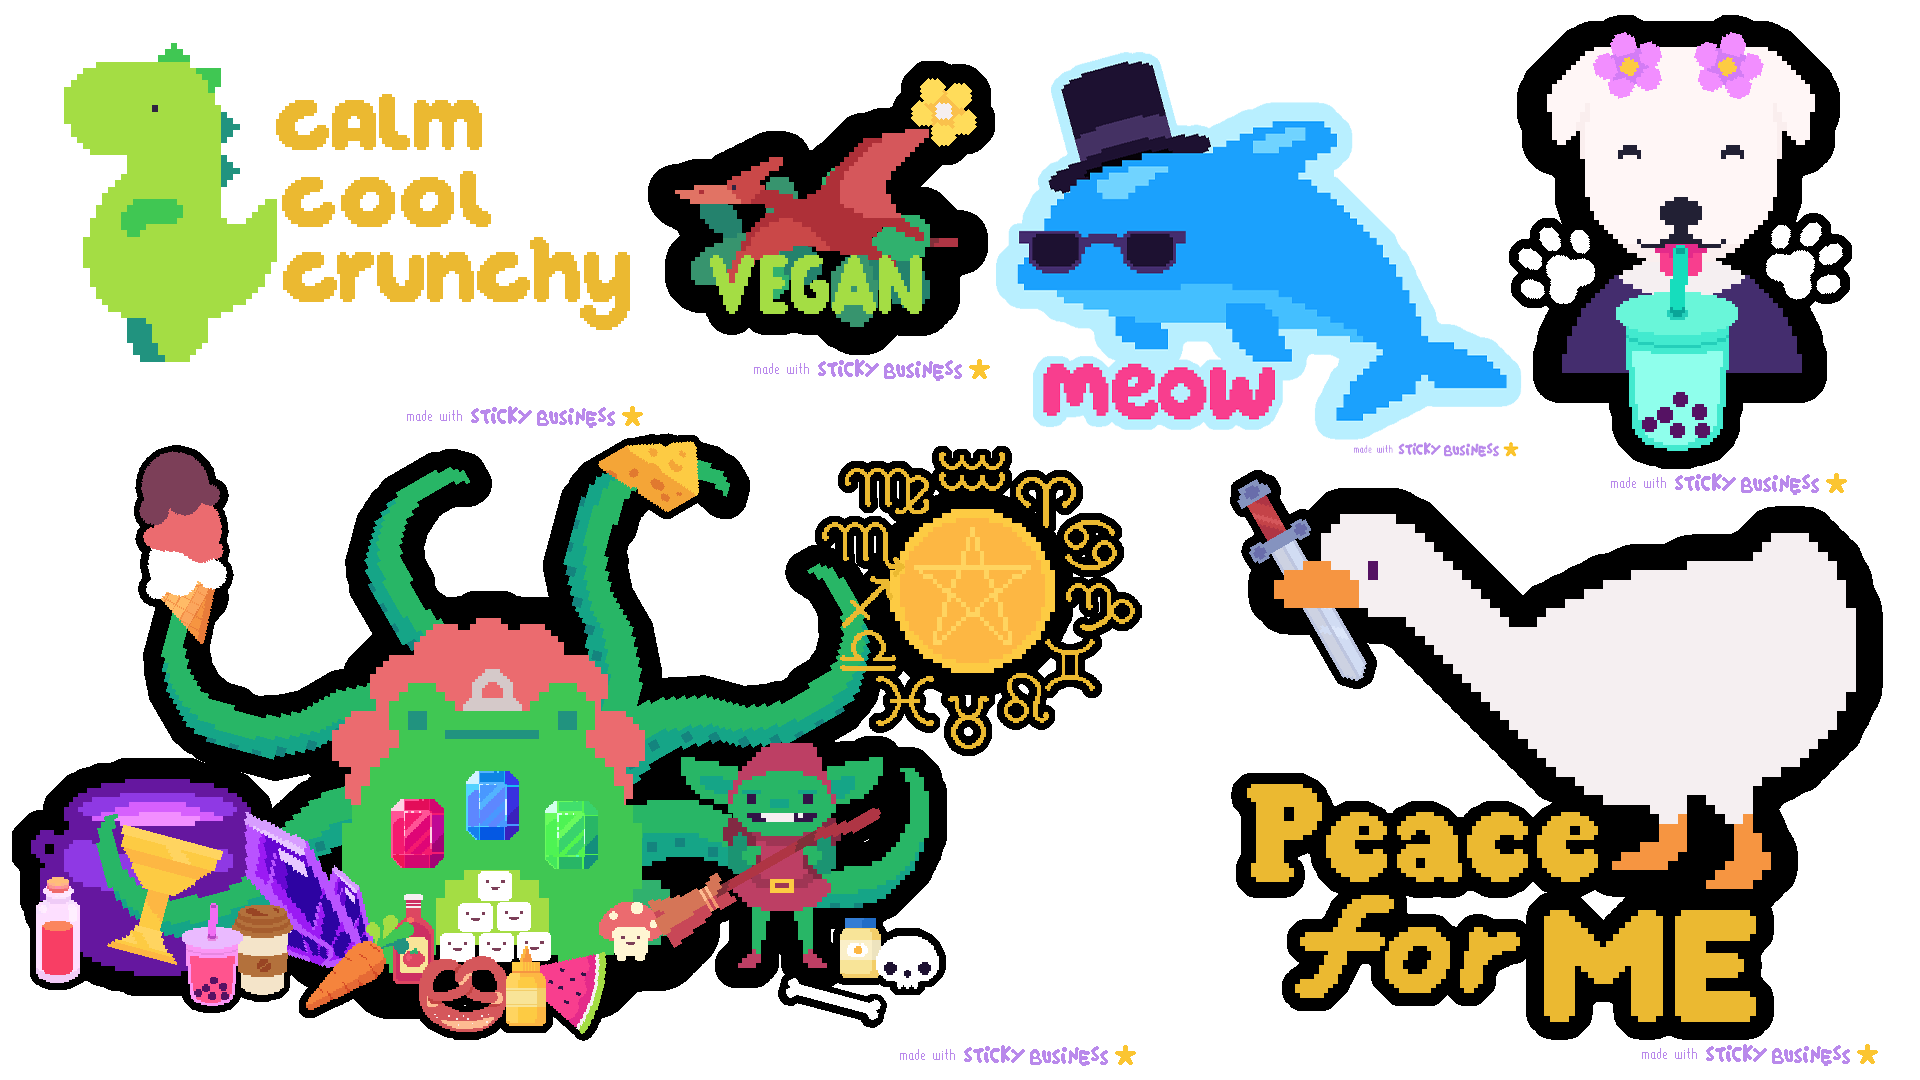 Six examples of Sticky Business stickers. The first is a green dinosaur that says "calm, cool, crunchy." The second is a pterodactyl that says "vegan." The third is a blue dolphin with a top hat and sunglasses; it says "meow." The fourth is a white puppy drinking mint boba. The fifth is a Cthulhu-like monster eating all sorts of food. And the seventh is a goose with a knife in its mouth, it says "peace for me."